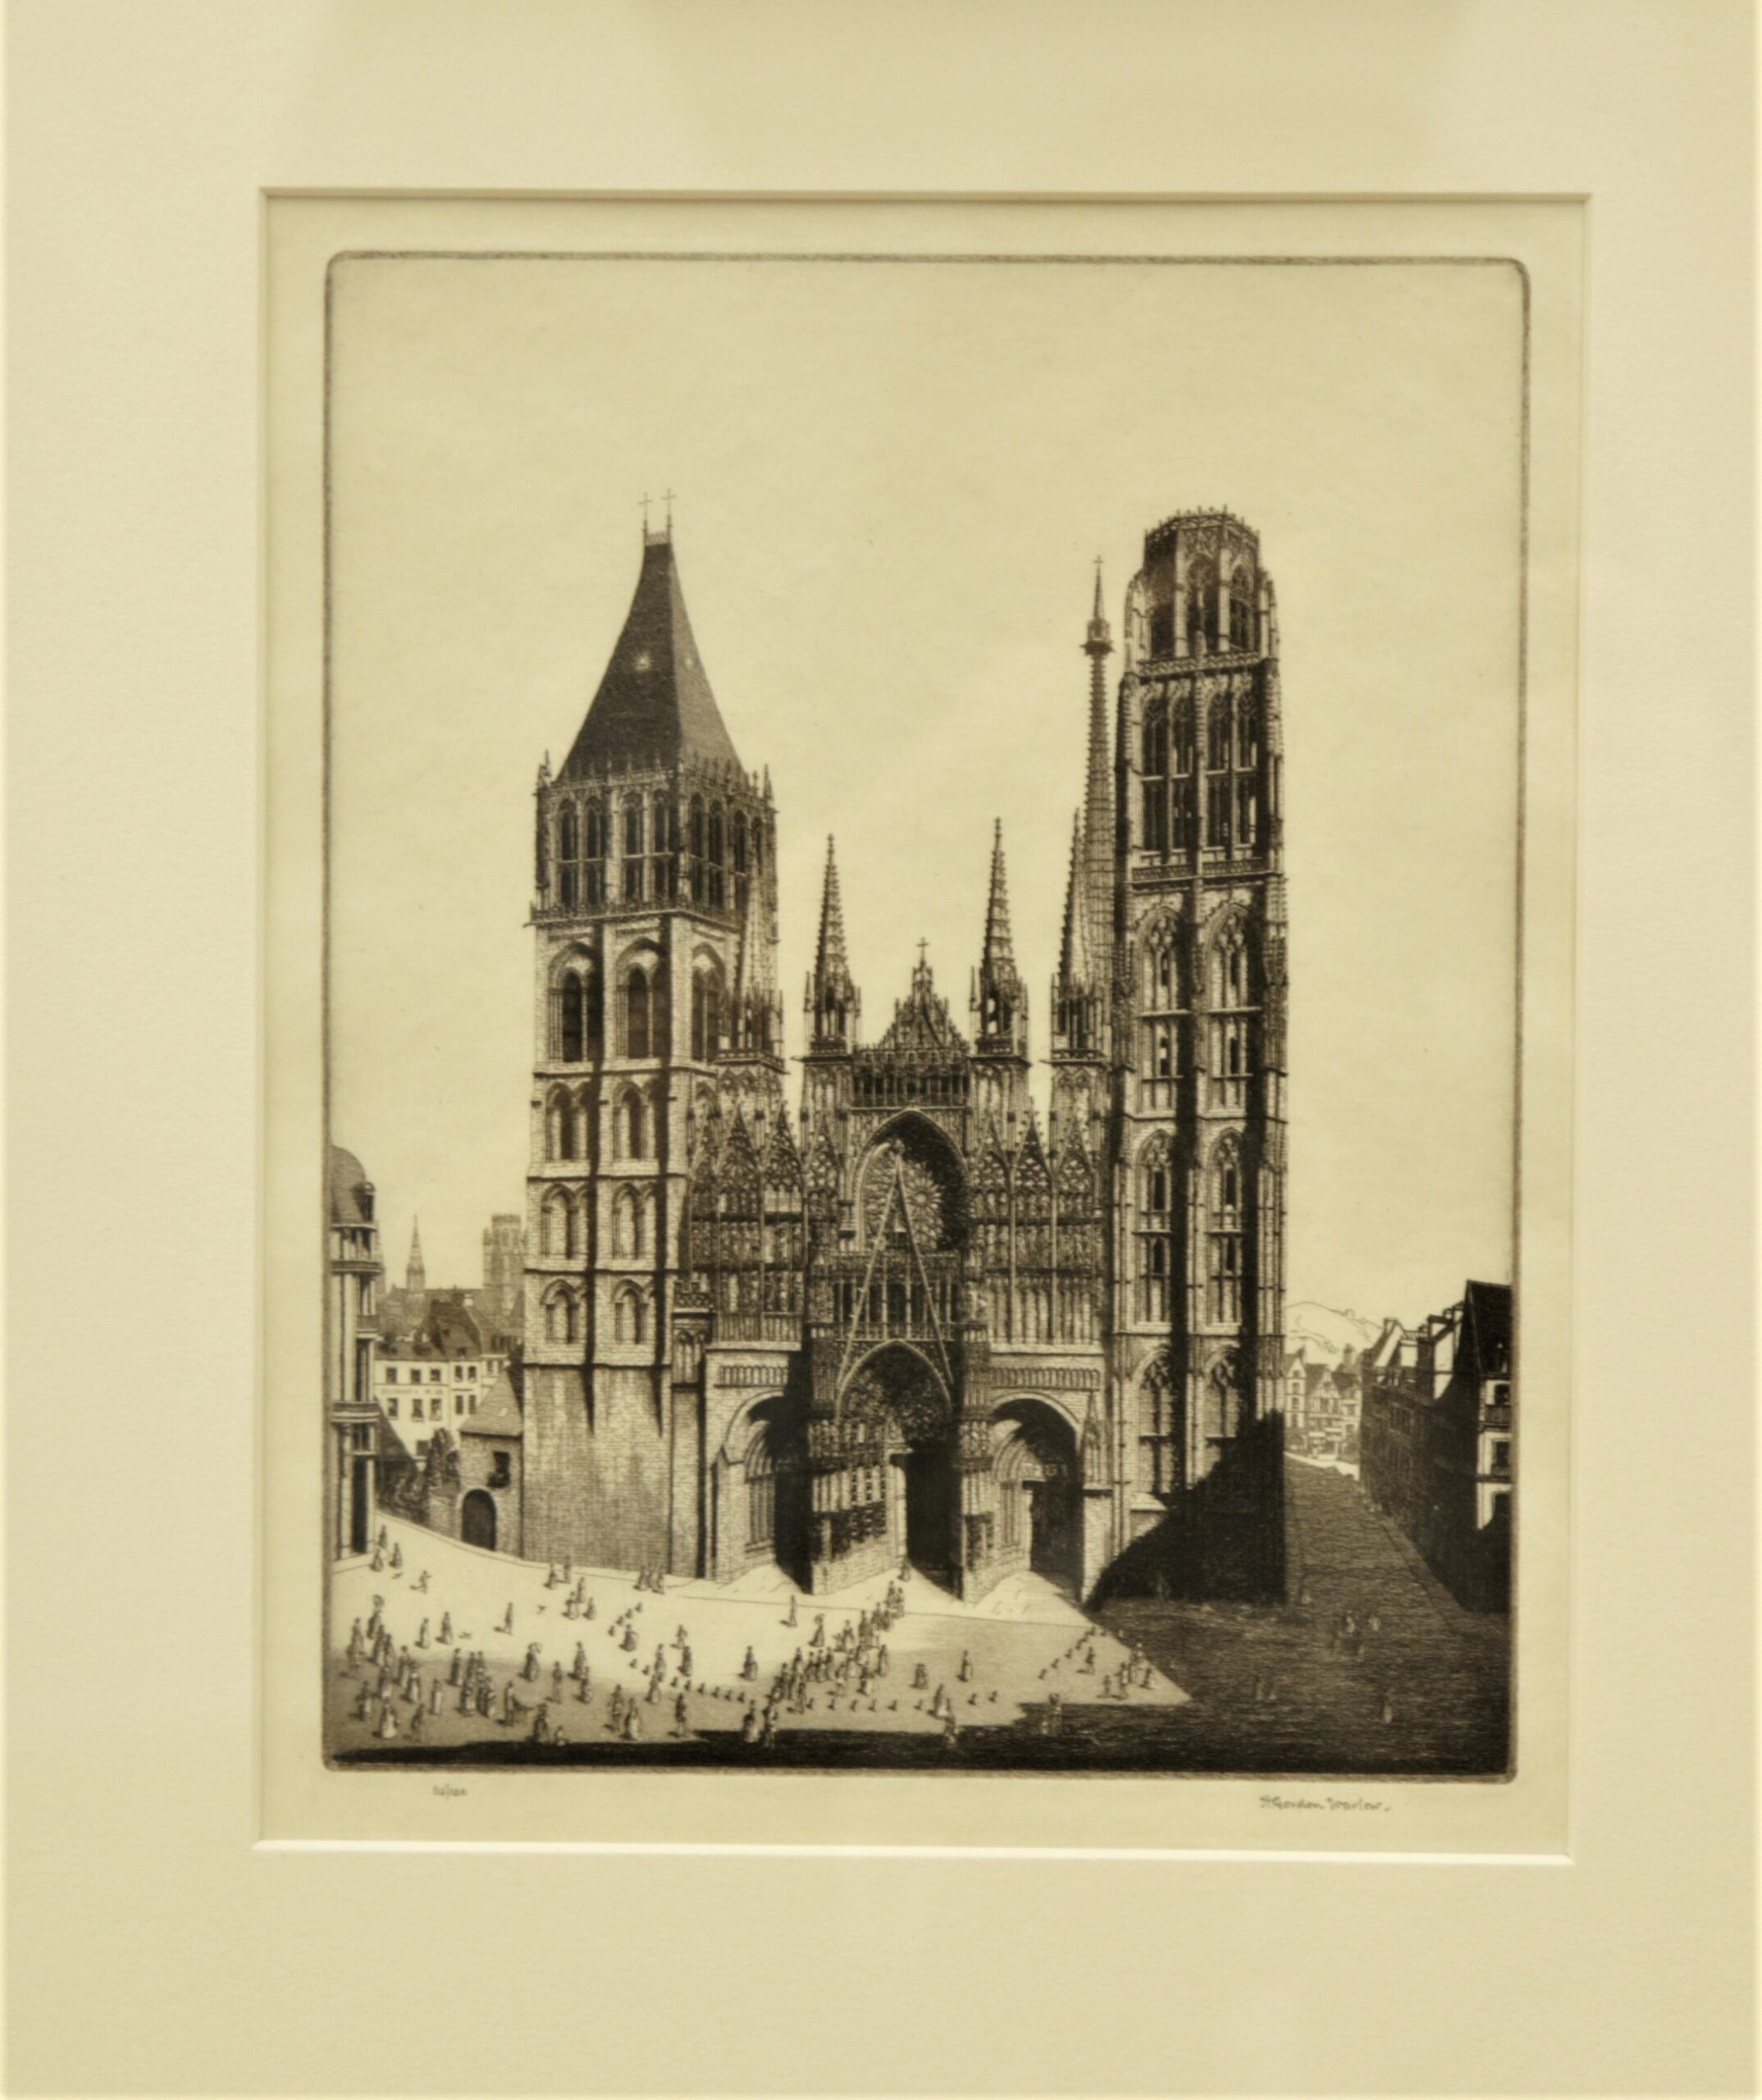 Rouen Cathedral Image